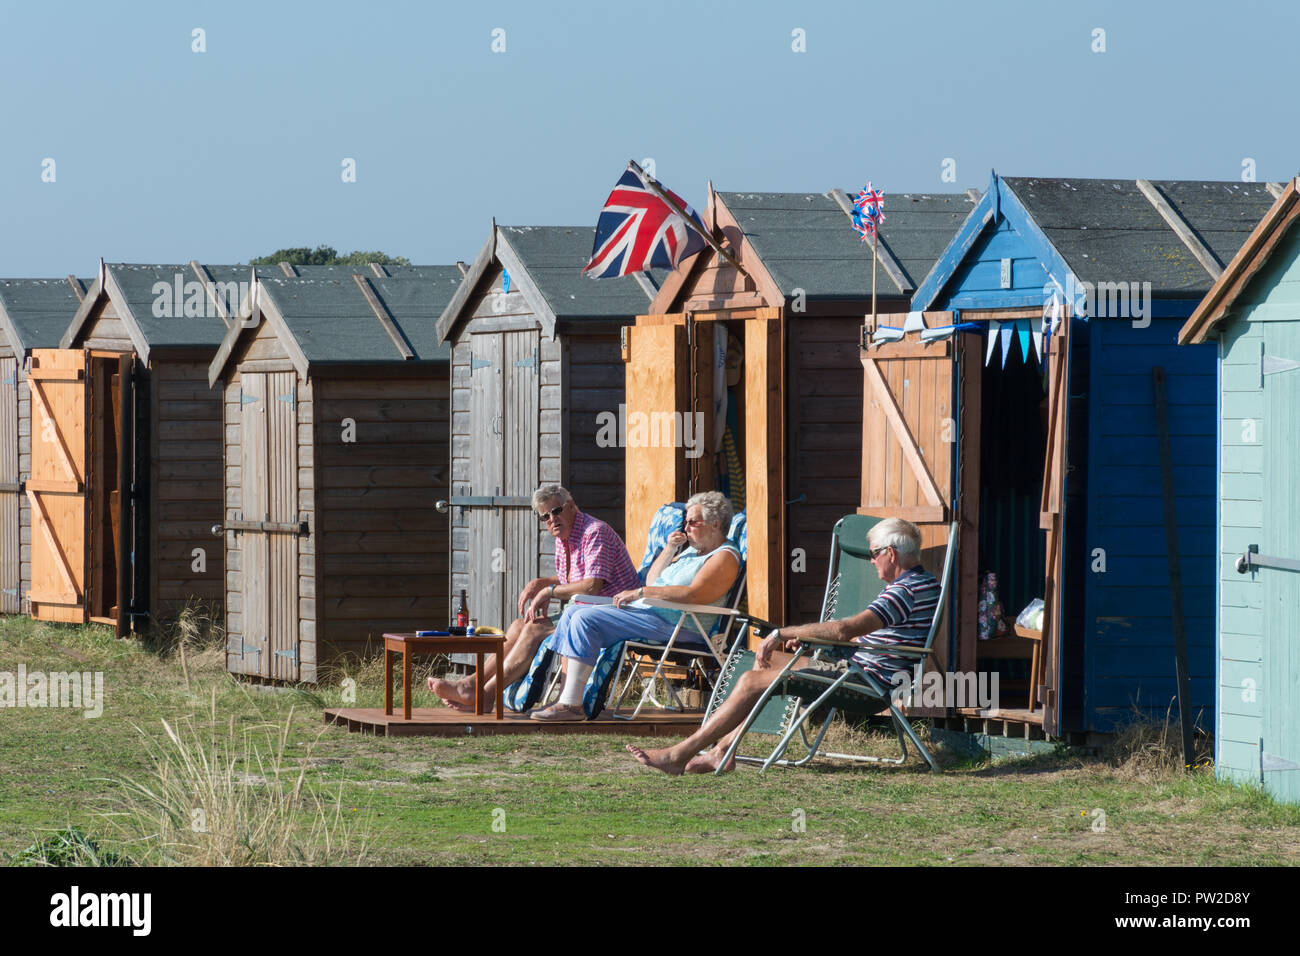 The seafront at Hayling Island with shingle beaches and colourful beach huts, Hampshire, UK. Three people sitting in front of a beach hut. Stock Photo